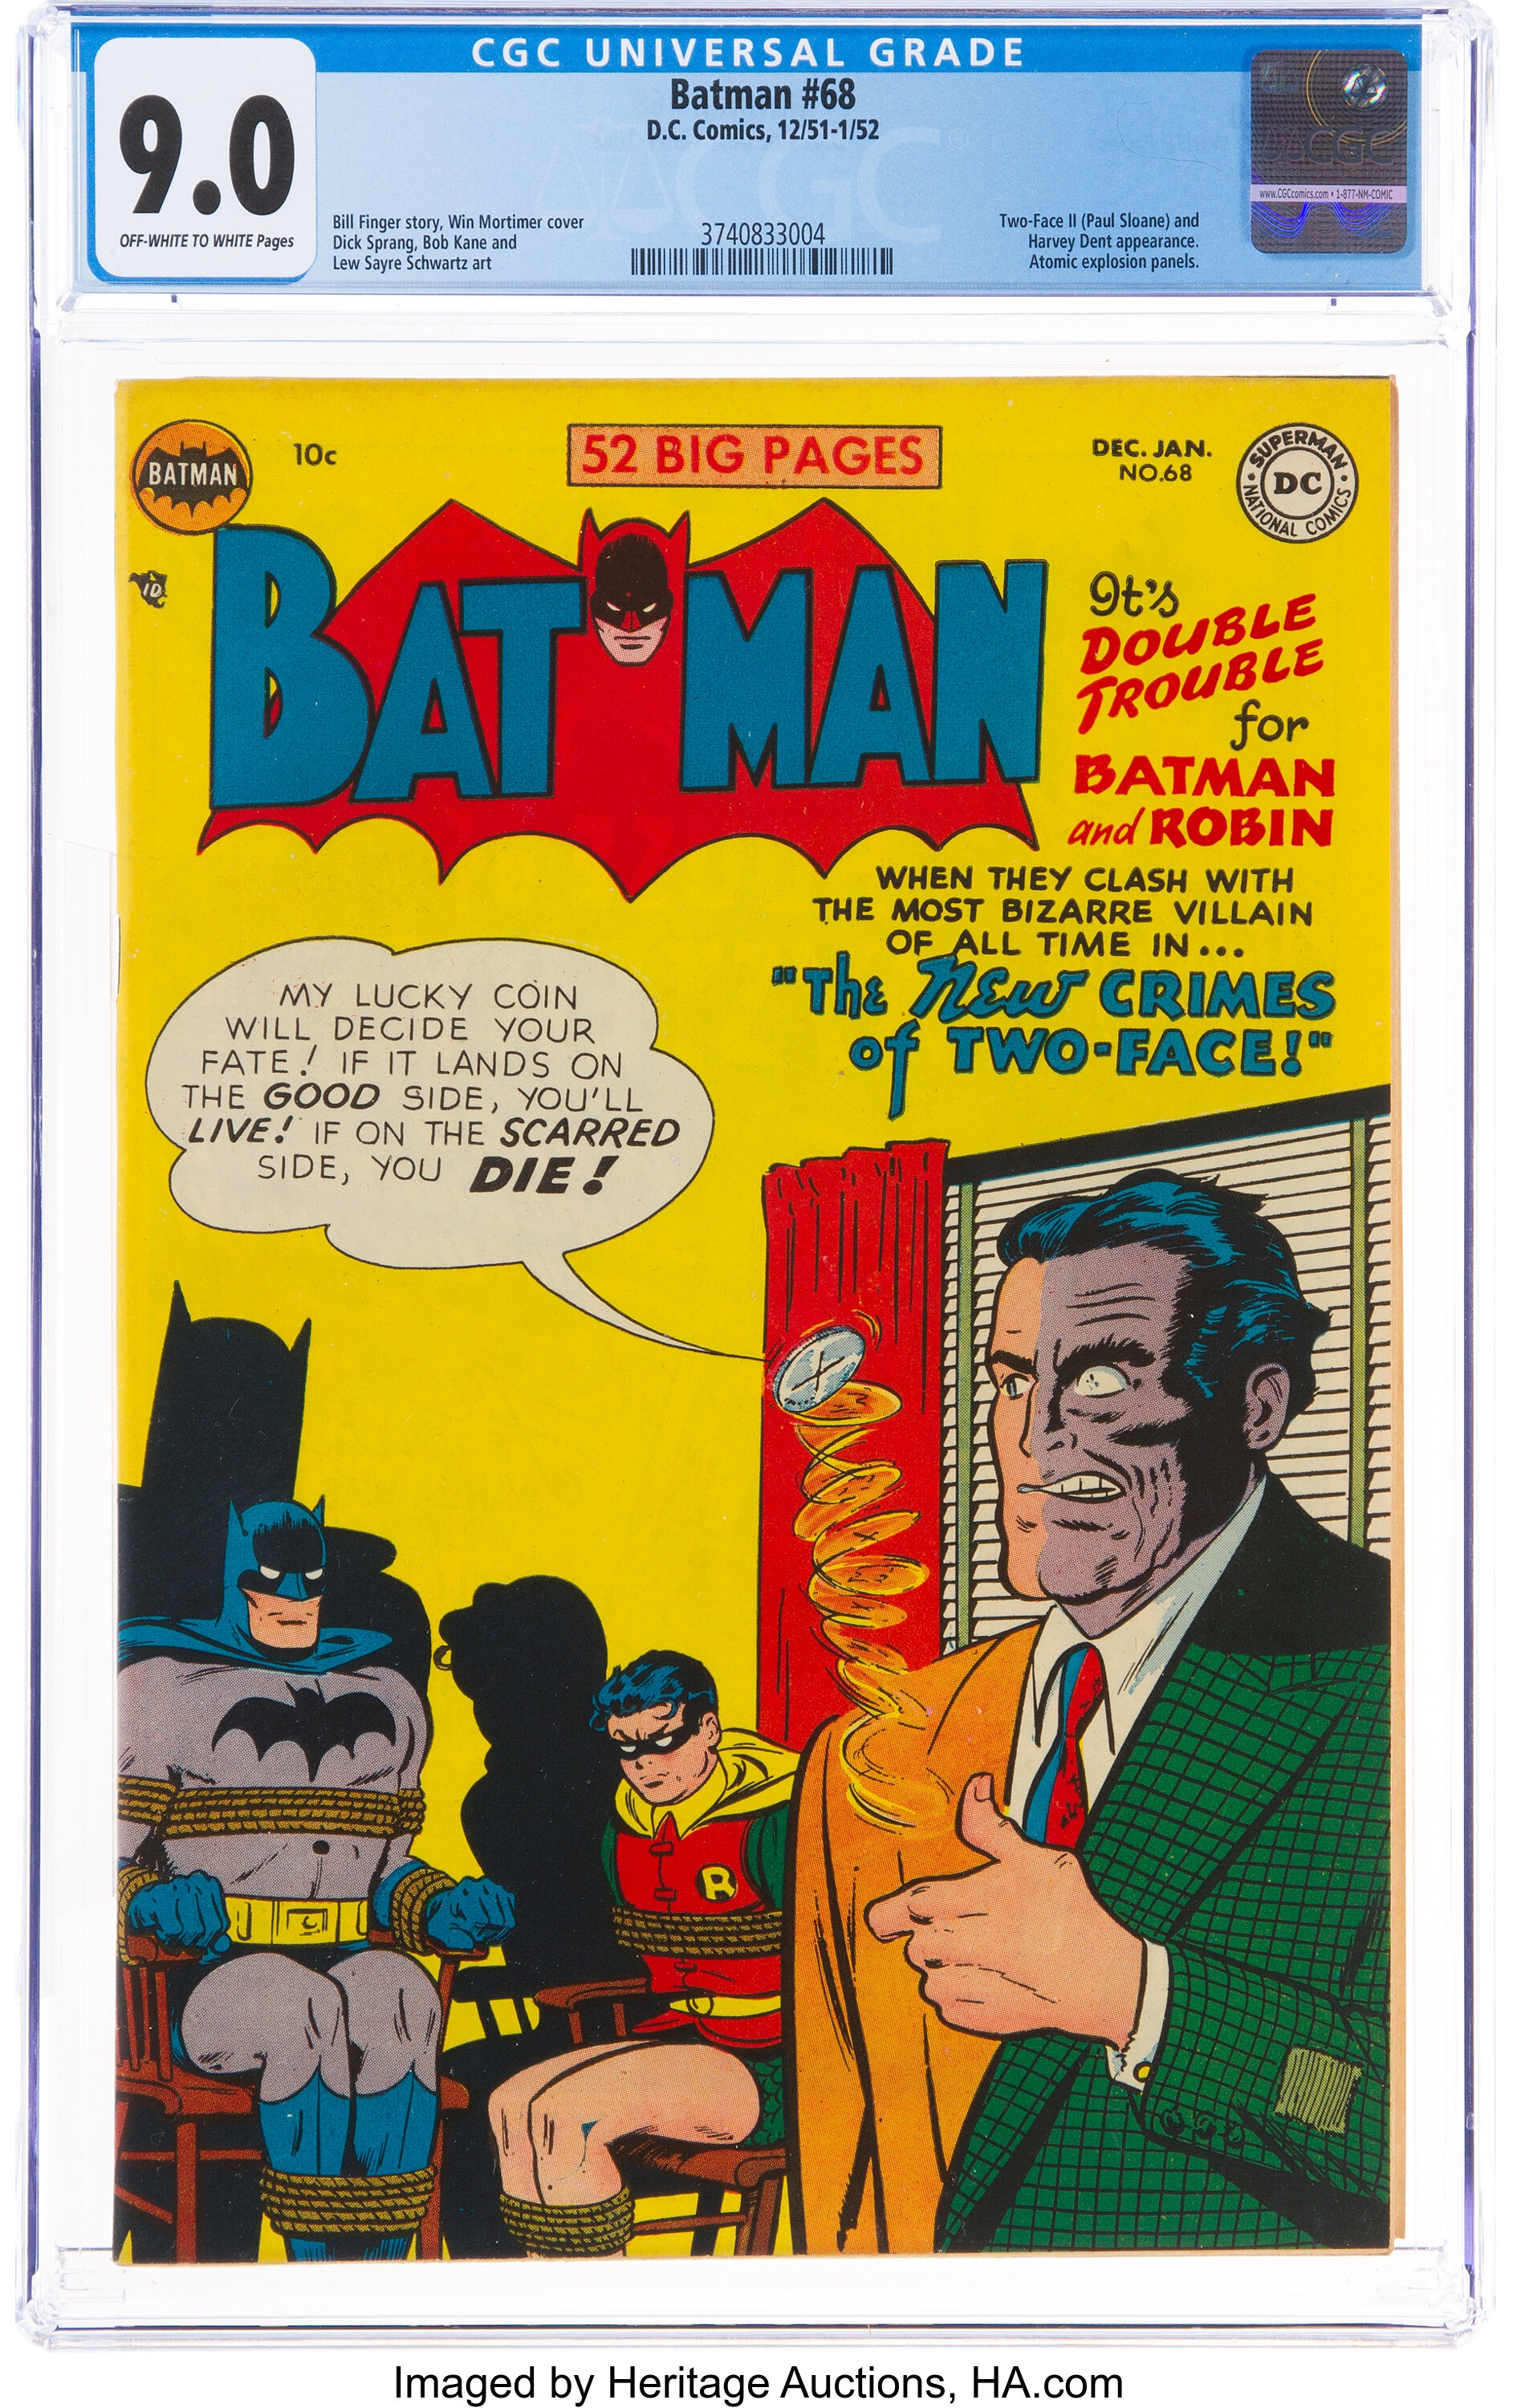 How Much Is Batman #68 Worth? Browse Comic Prices | Heritage Auctions